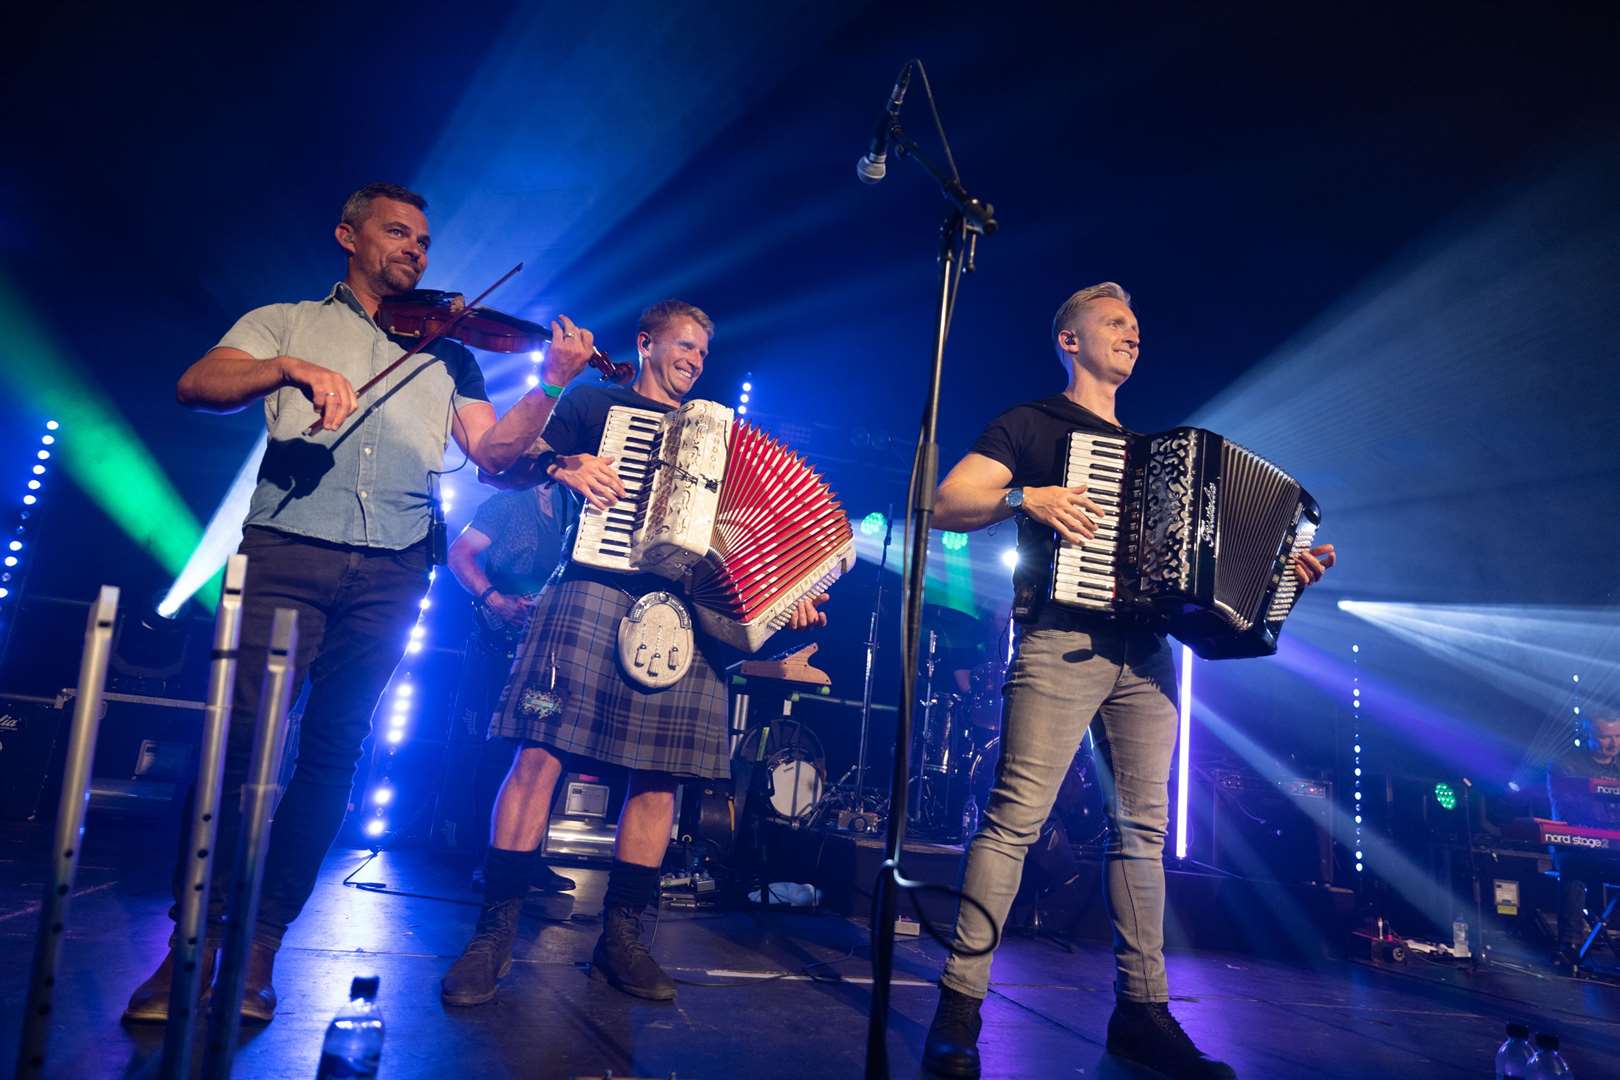 Skerryvore are back on the bill again.